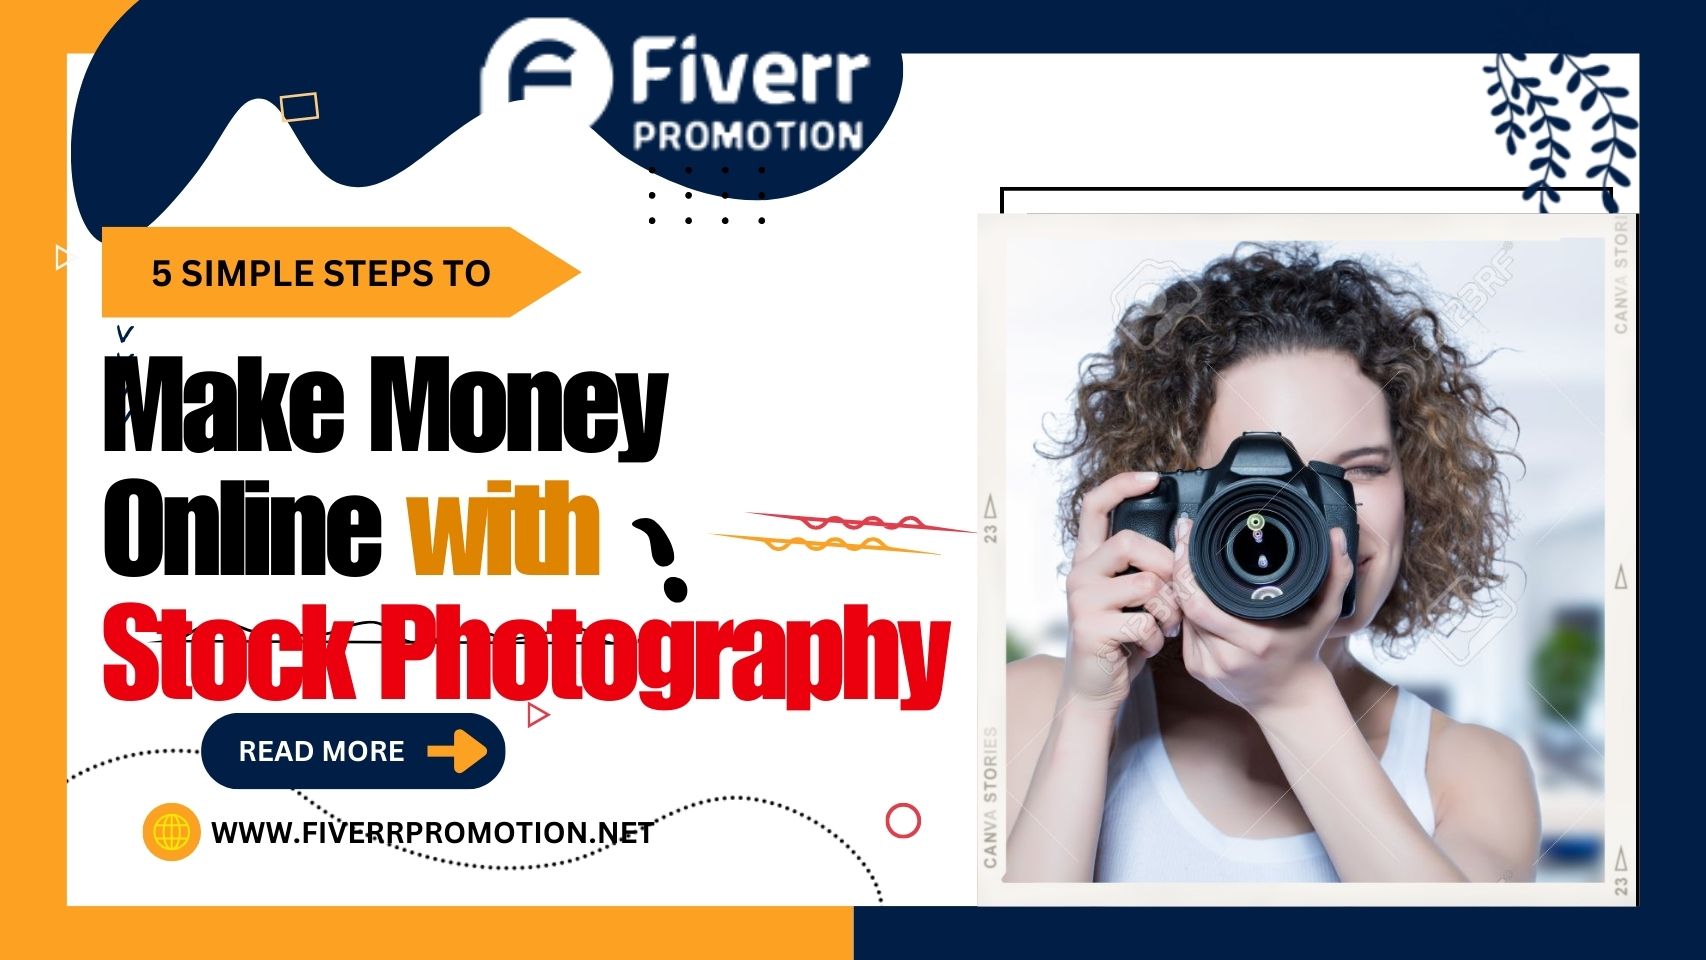 5 Simple Steps to Make Money Online with Stock Photography